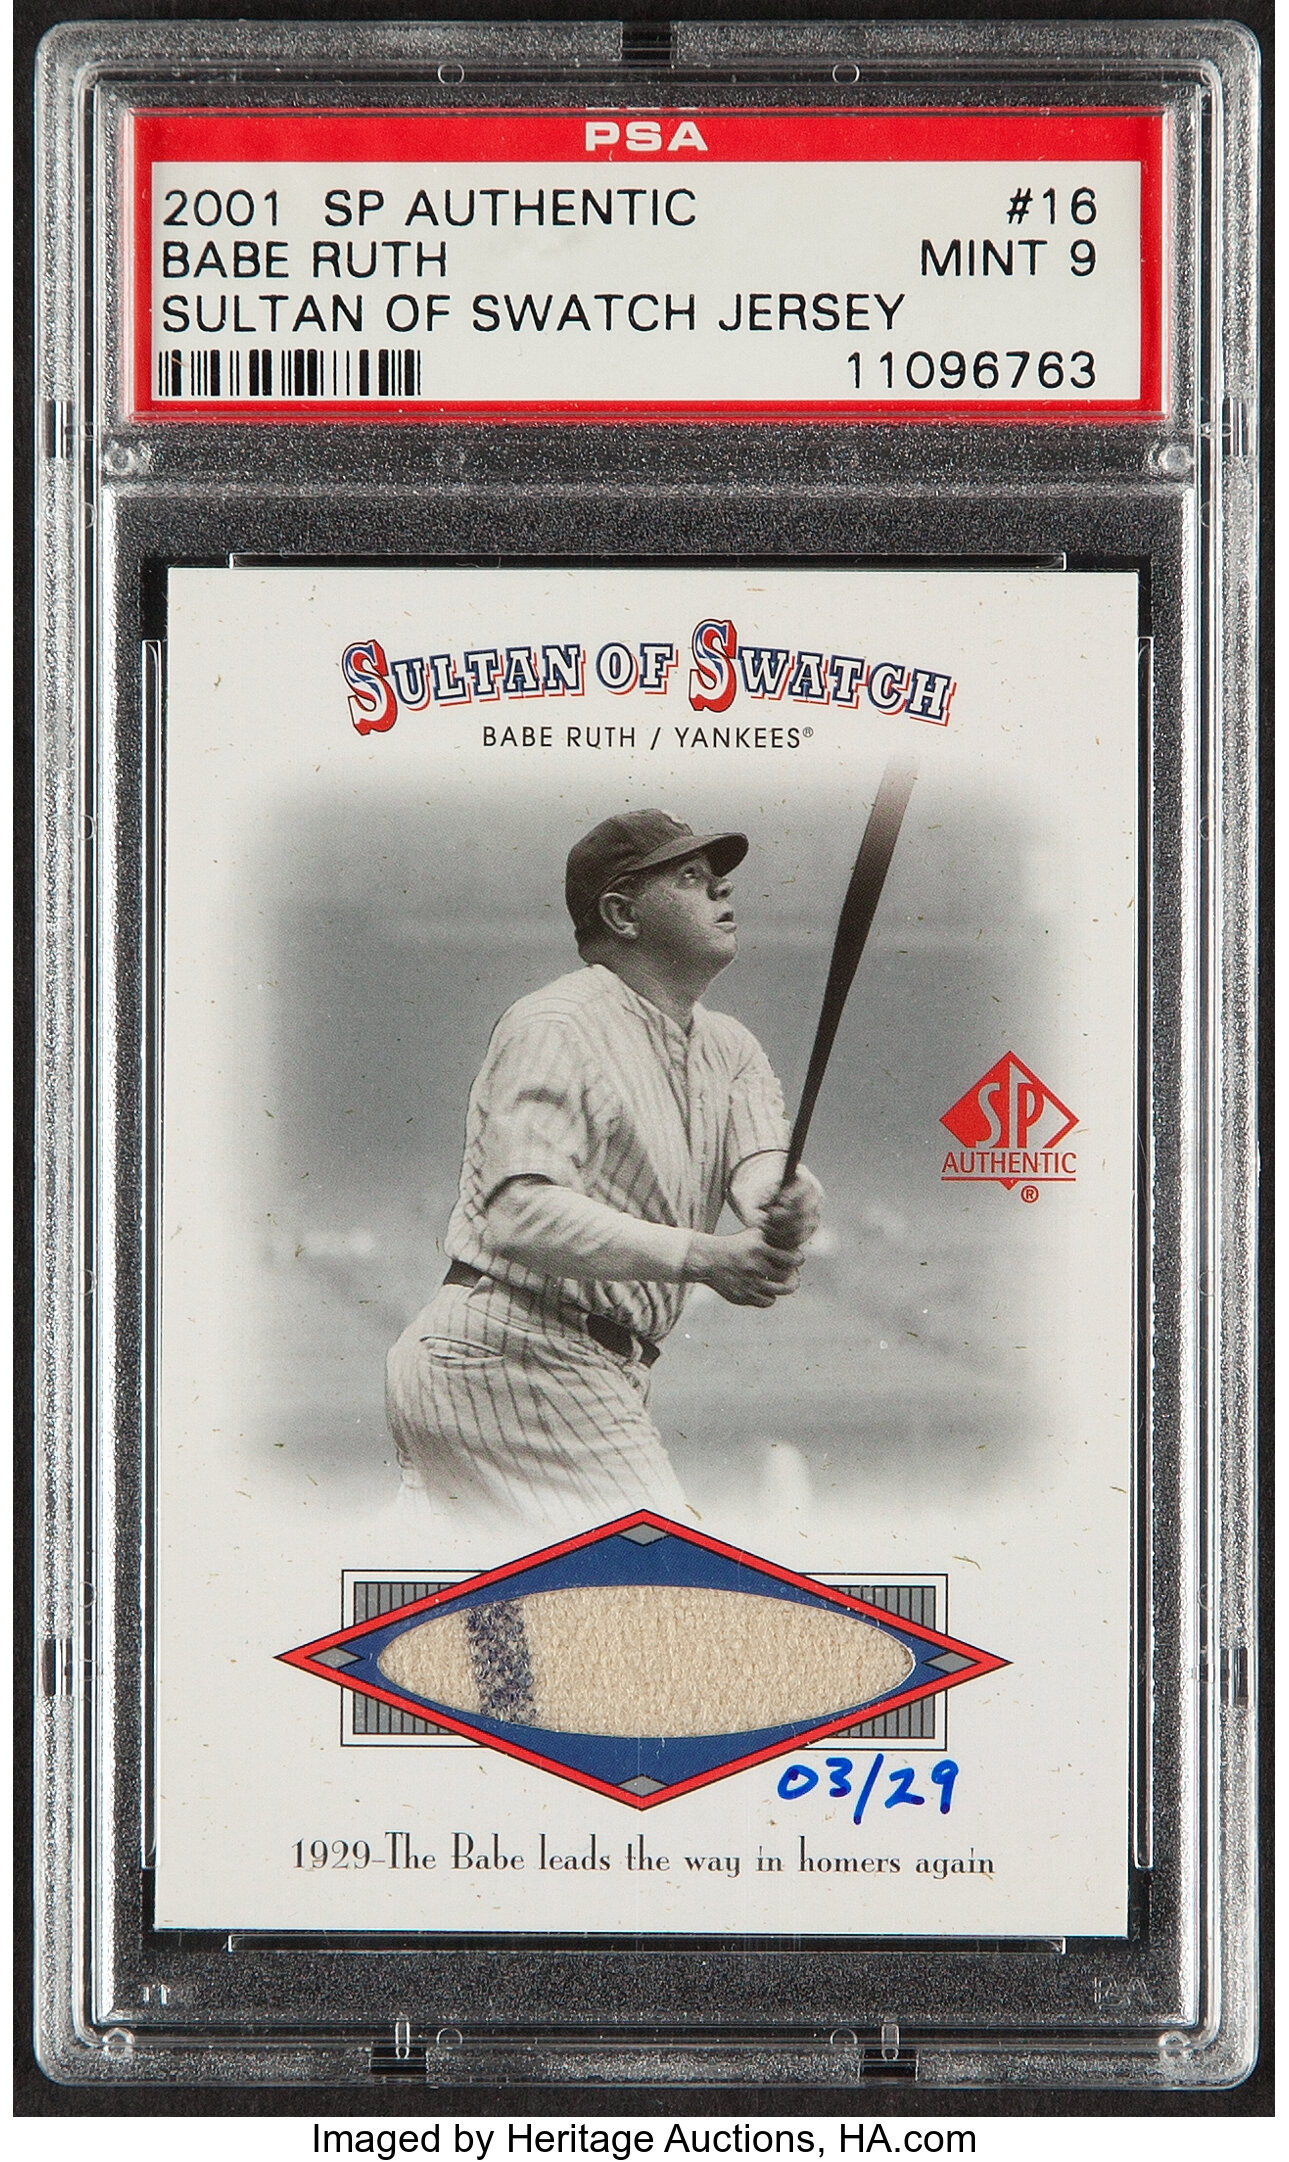 2001 SP Authentic Sultan of Swat Babe Ruth Jersey Relic #SOS16 PSA